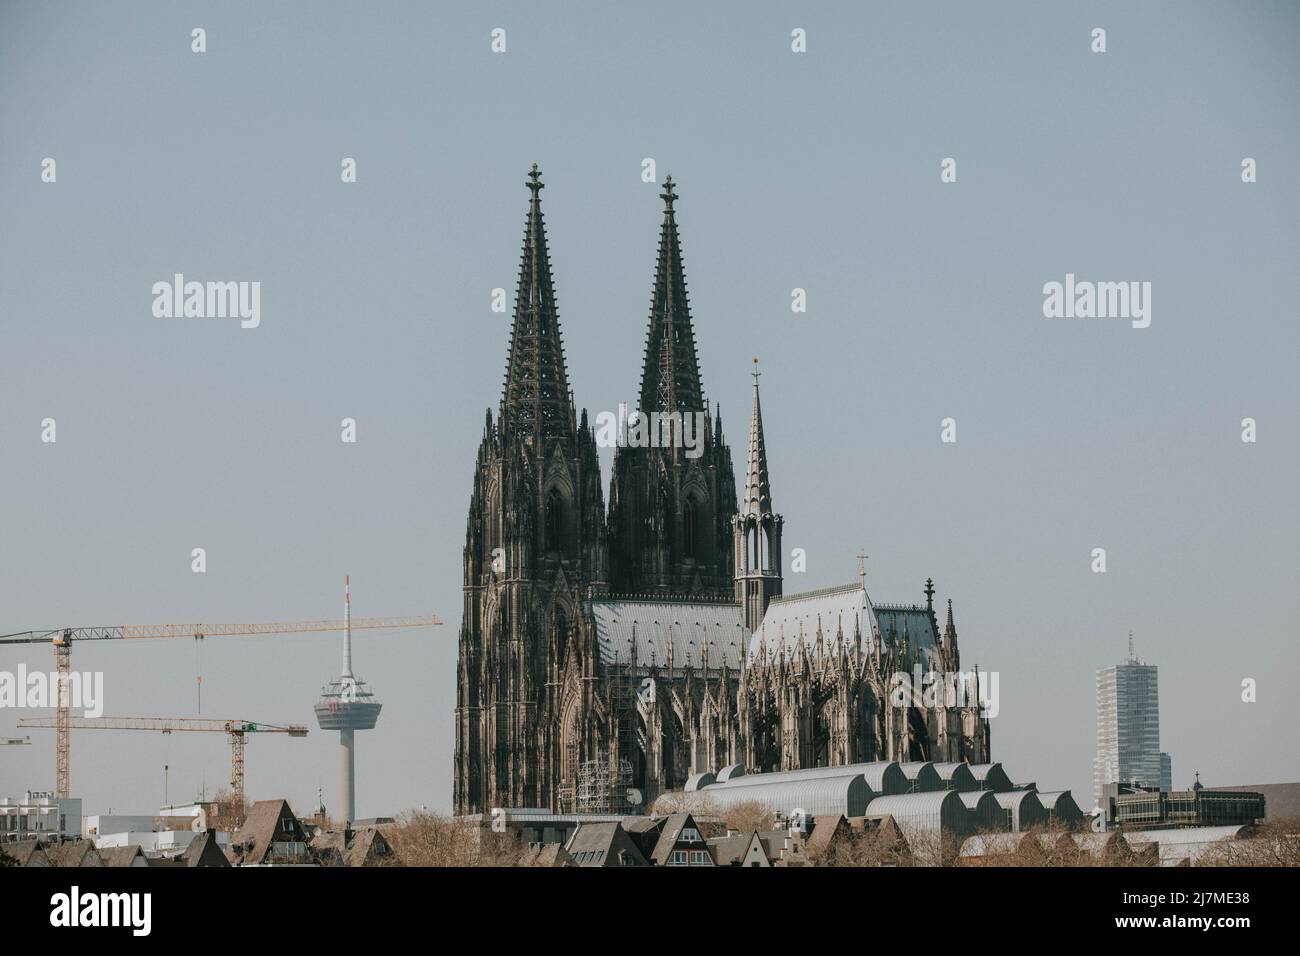 Kölner Dom (Cologne Cathedral) with construction cranes Stock Photo